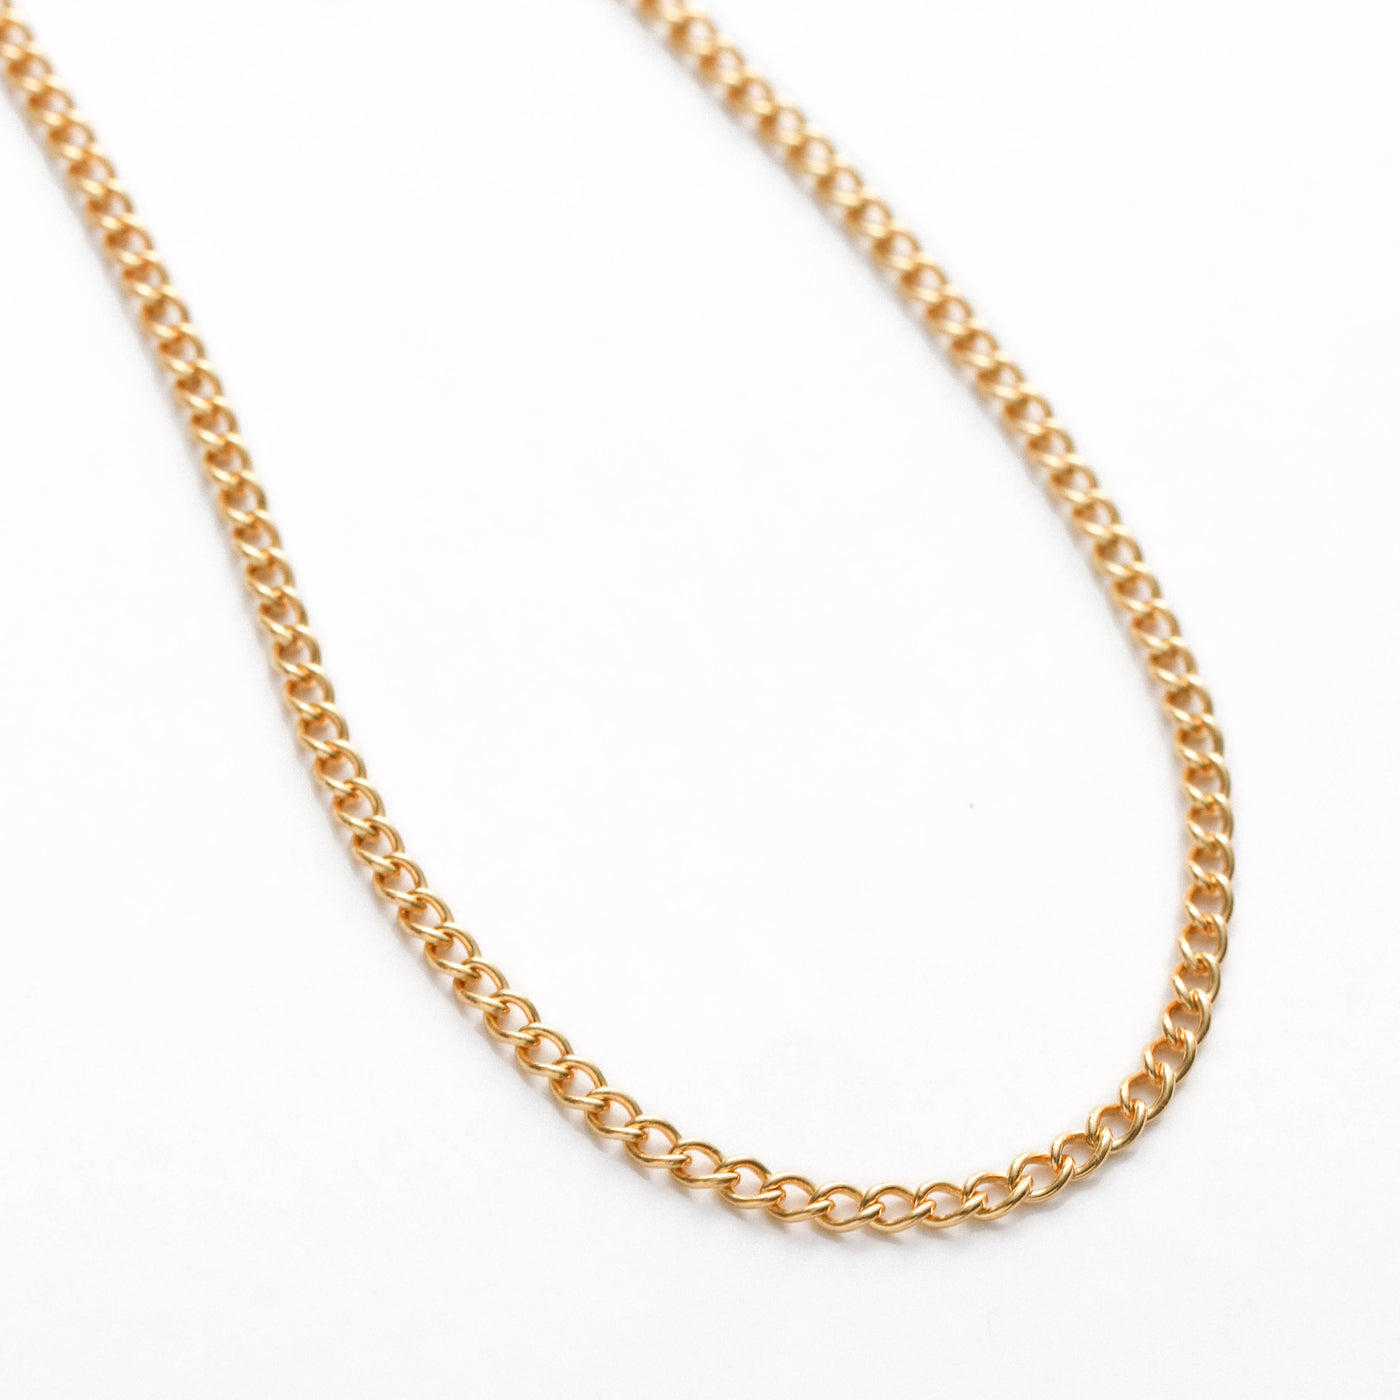 Curb chain necklace